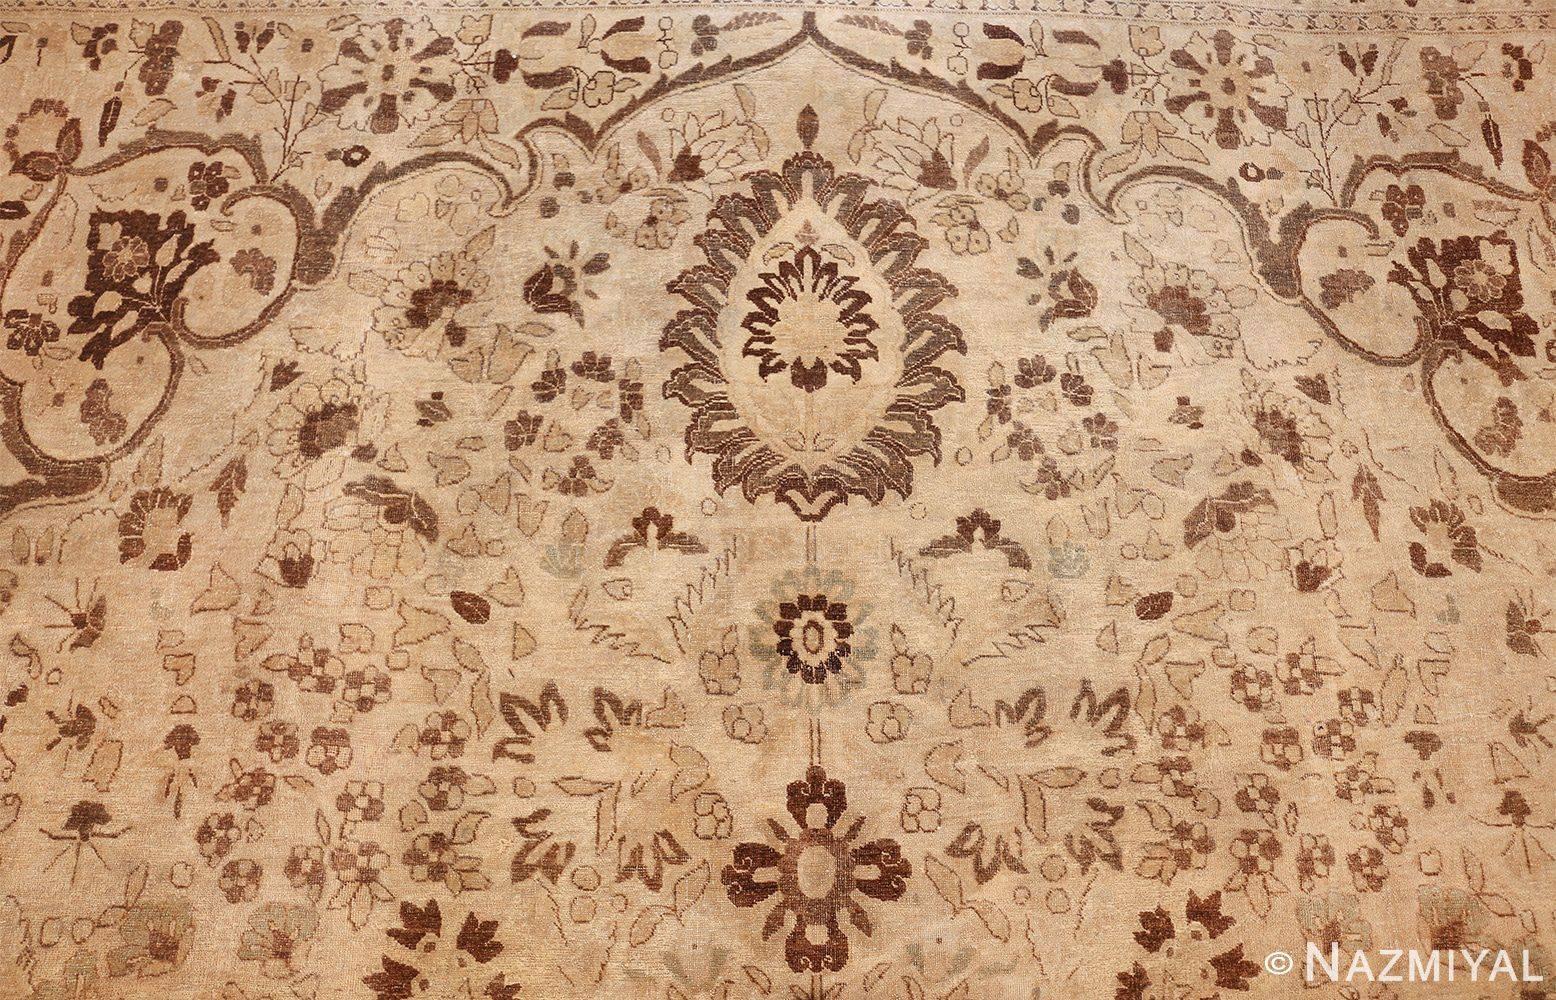 Magnificent vase design antique Persian Tabriz rug, country of origin / rug type: Persian rug, date circa 1920. This brown earth tone color rug is a magnificently decorative and fine antique Persian Tabriz rug.

Antique Tabriz rugs are